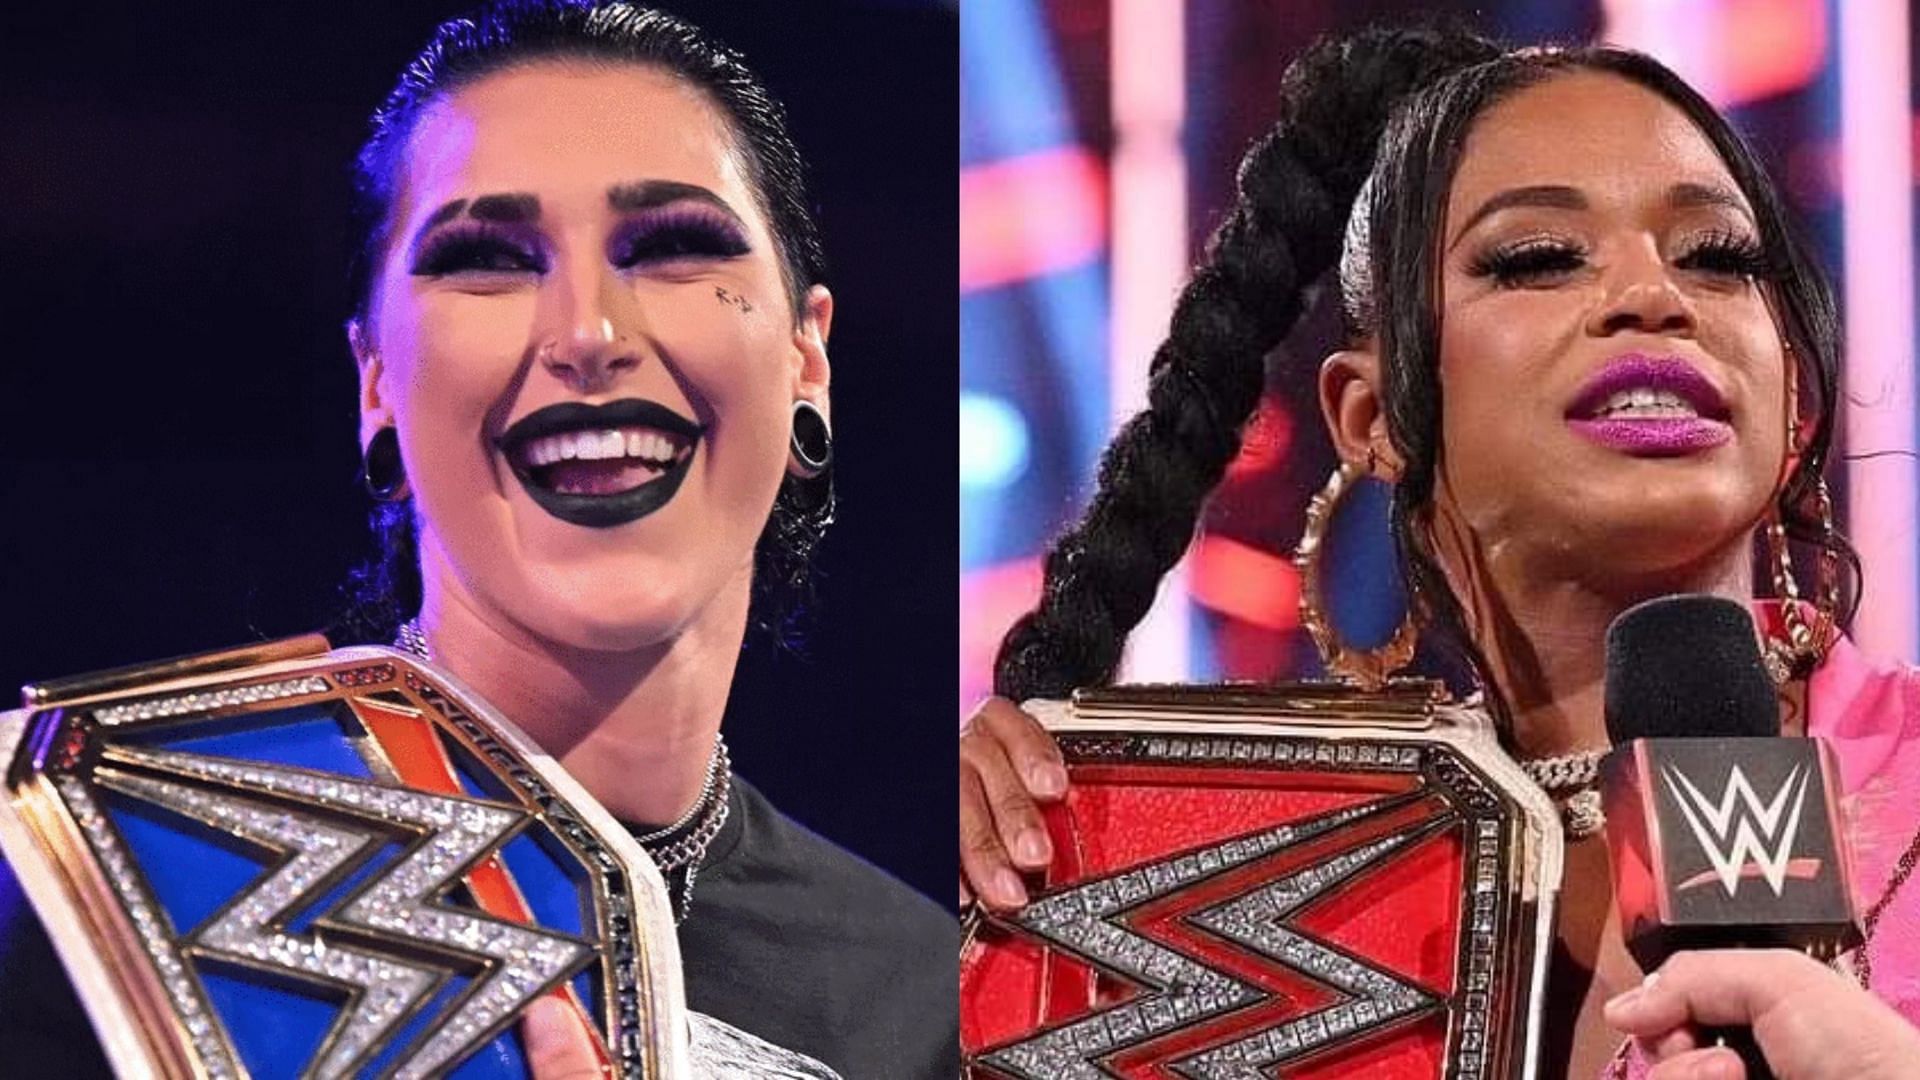 Bianca Belair and Rhea Ripley are two of the biggest stars in WWE